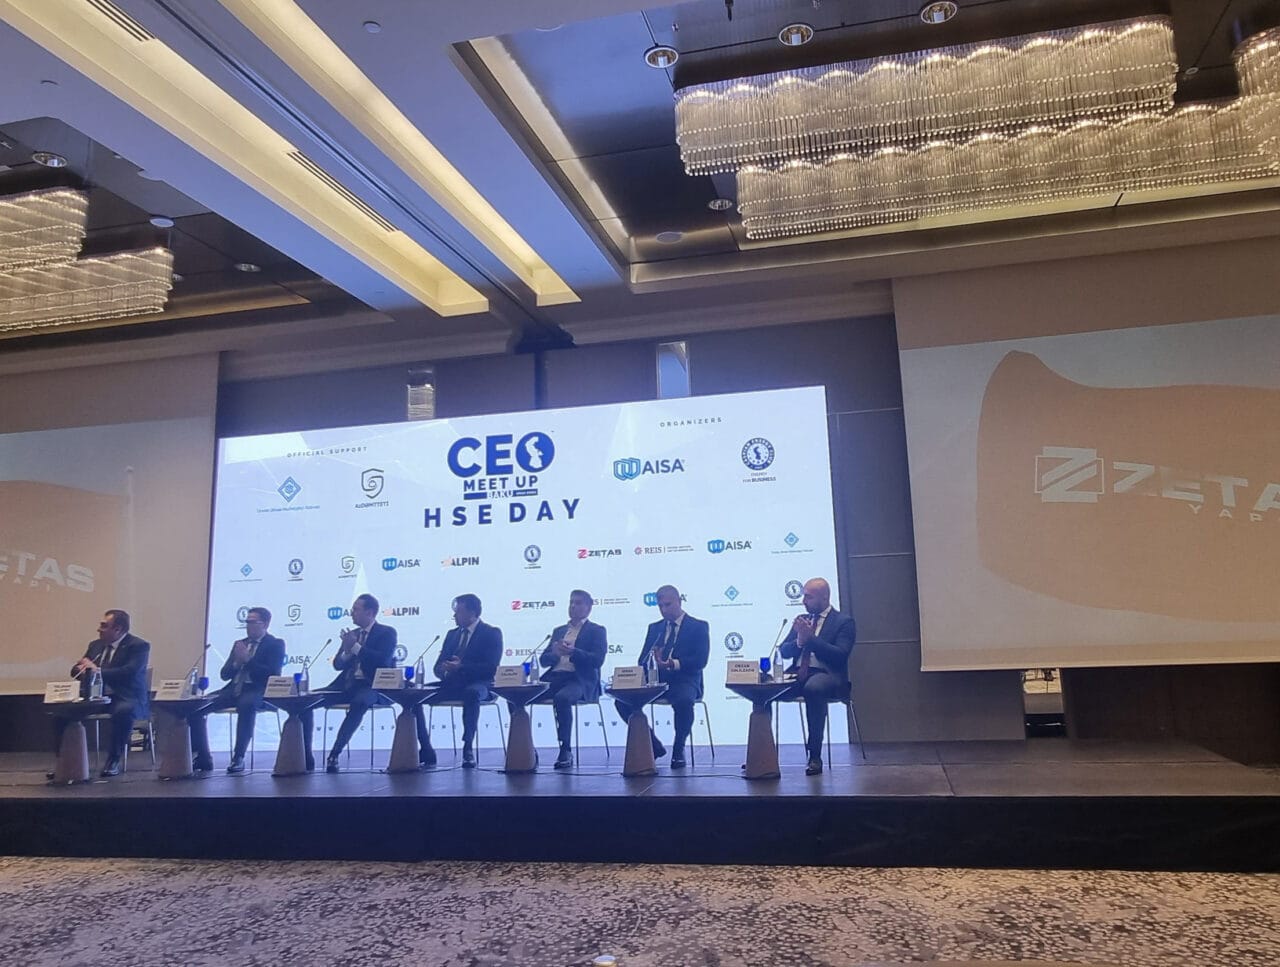 ZETAS sponsored the “CEO MeetUp: HSE day” event in Baku